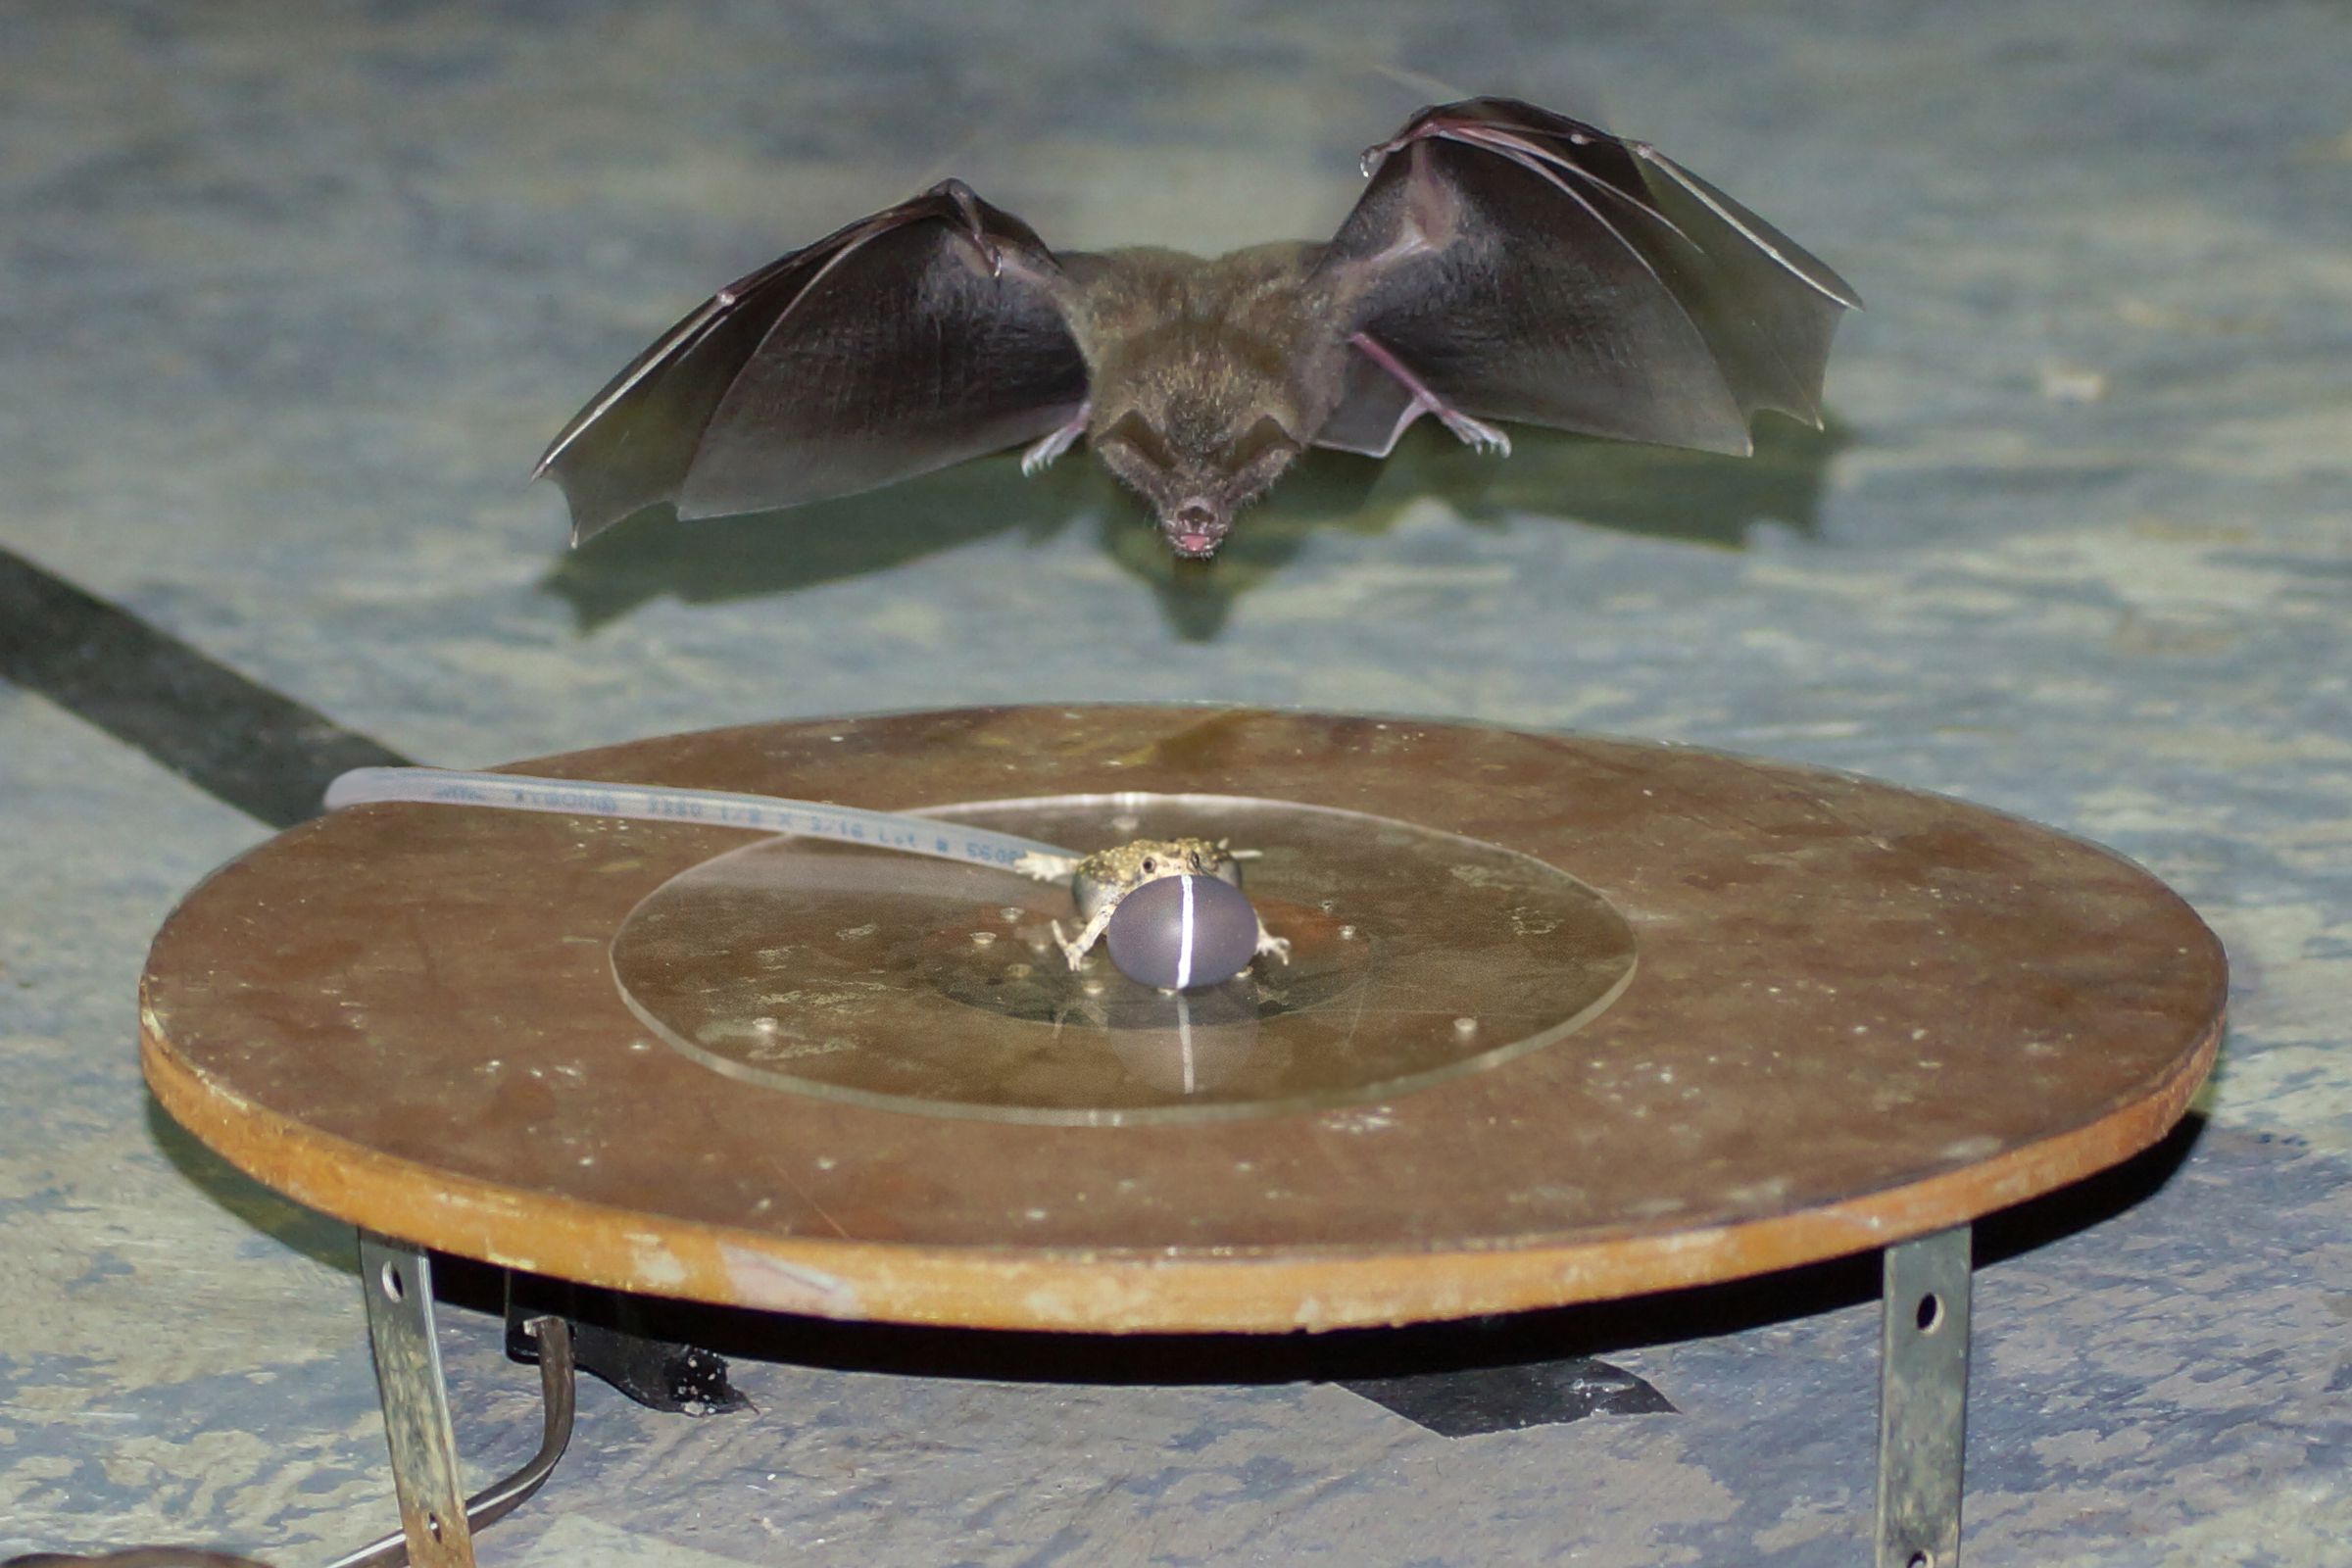 A fringe-lipped bat attacking the robotic frog